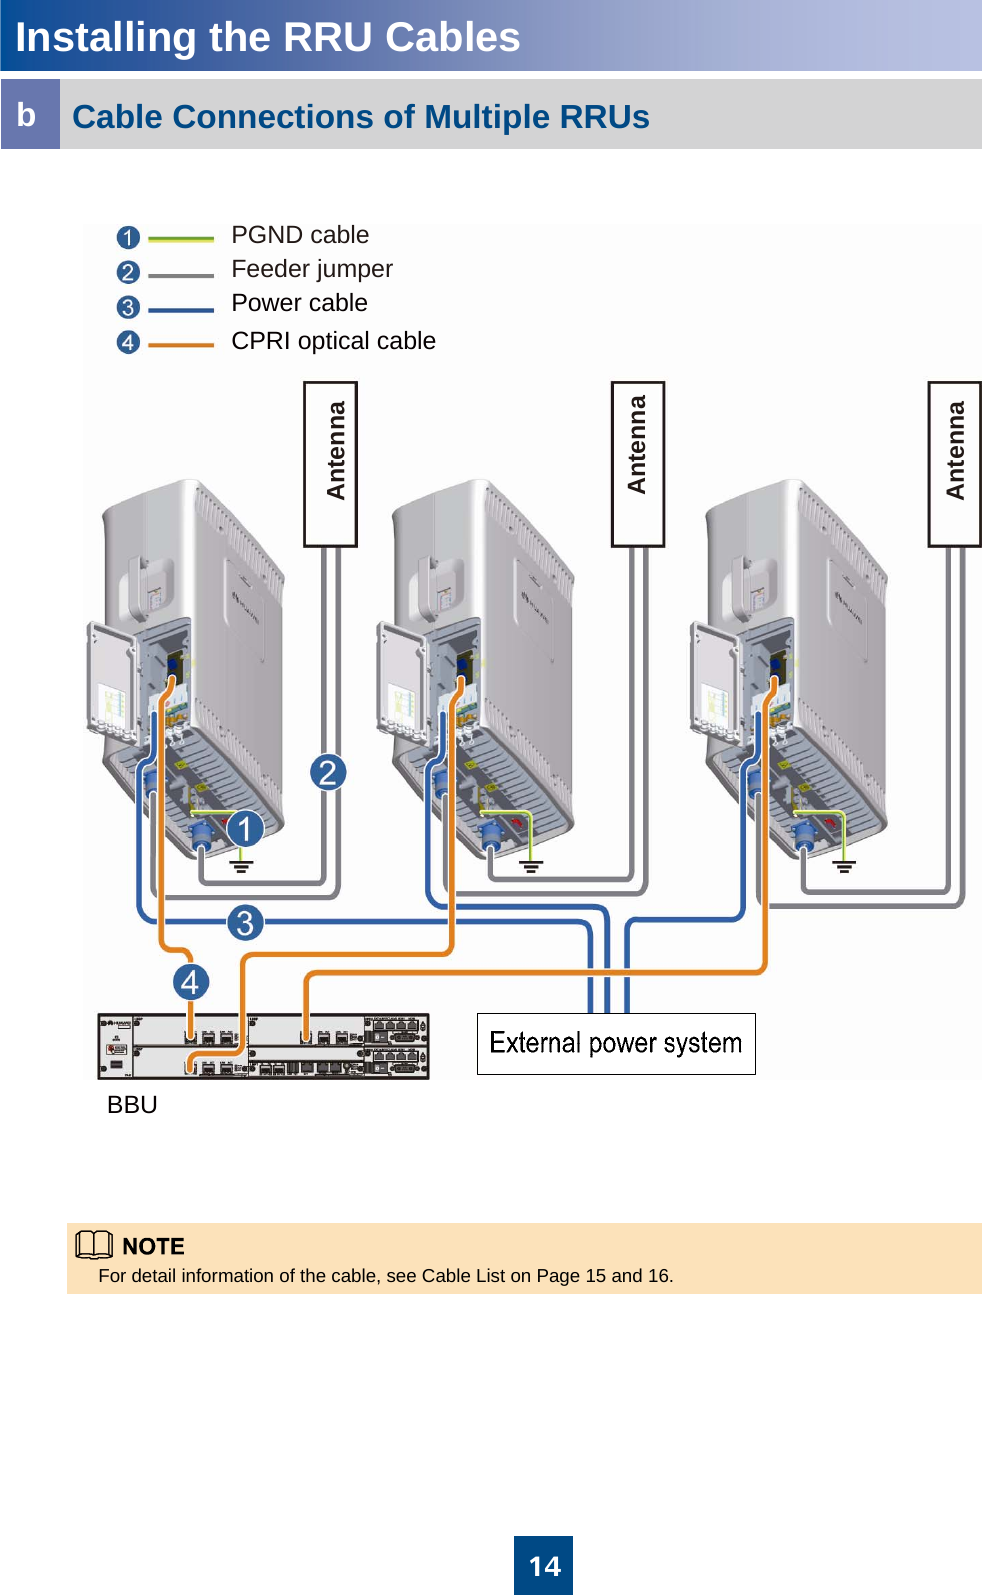 Installing the RRU CablesCable Connections of Multiple RRUsb14For detail information of the cable, see Cable List on Page 15 and 16.PGND cableFeeder jumperPower cableCPRI optical cableBBUAntennaAntennaAntenna